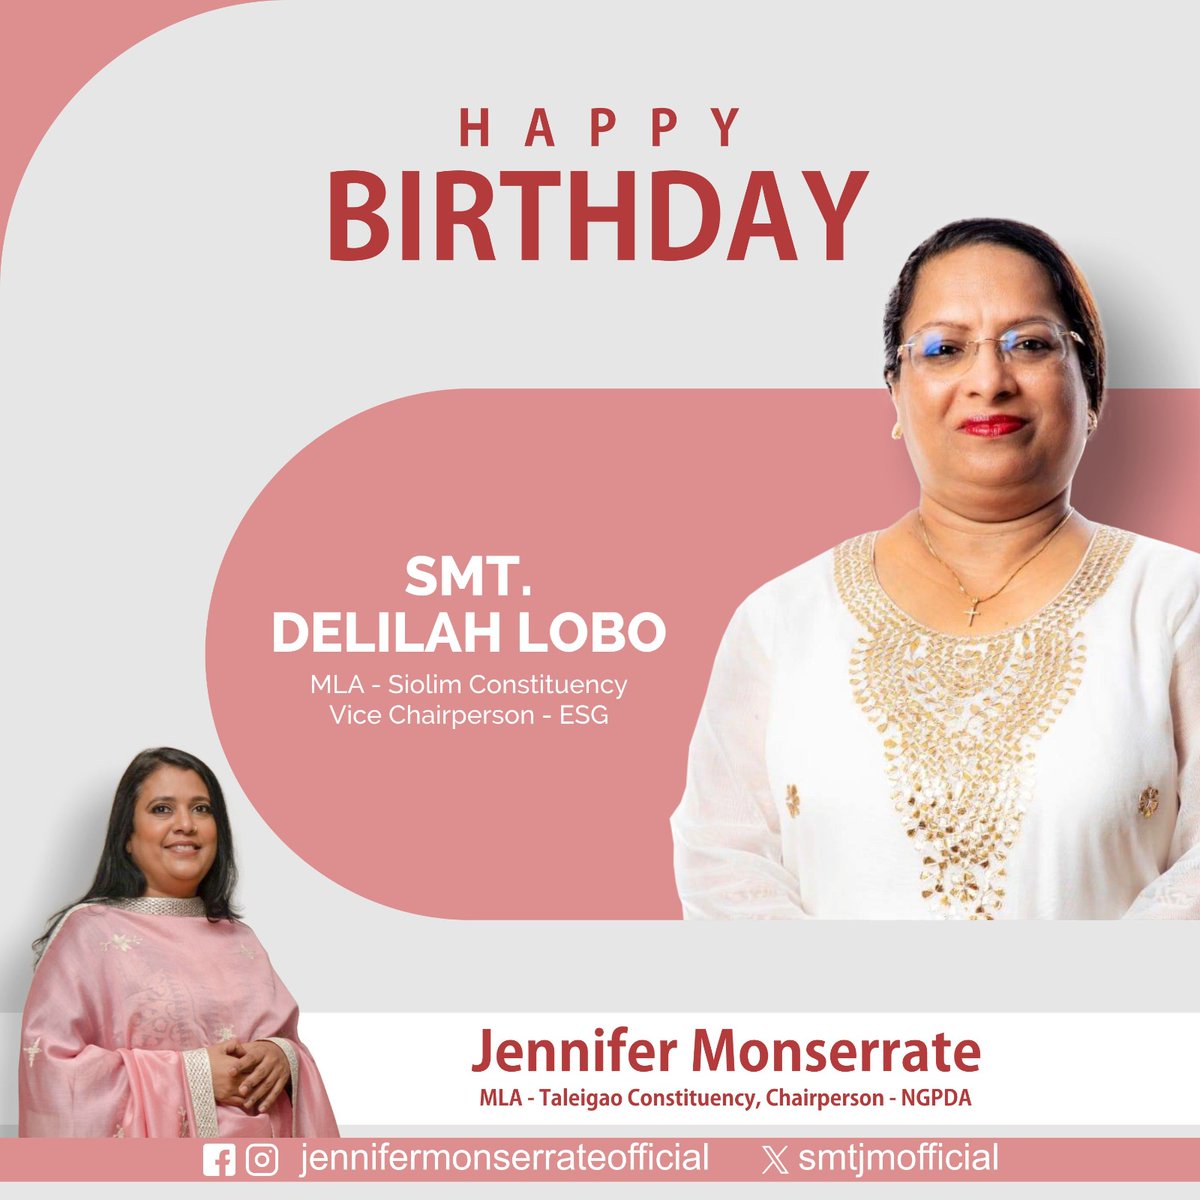 Warmest birthday wishes to Smt. @DelilahLobo77, MLA - Siolim Constituency and Vice Chairperson of ESG. May your special day be filled with cherished moments with your loved ones. Wishing you many more years of success and happiness.